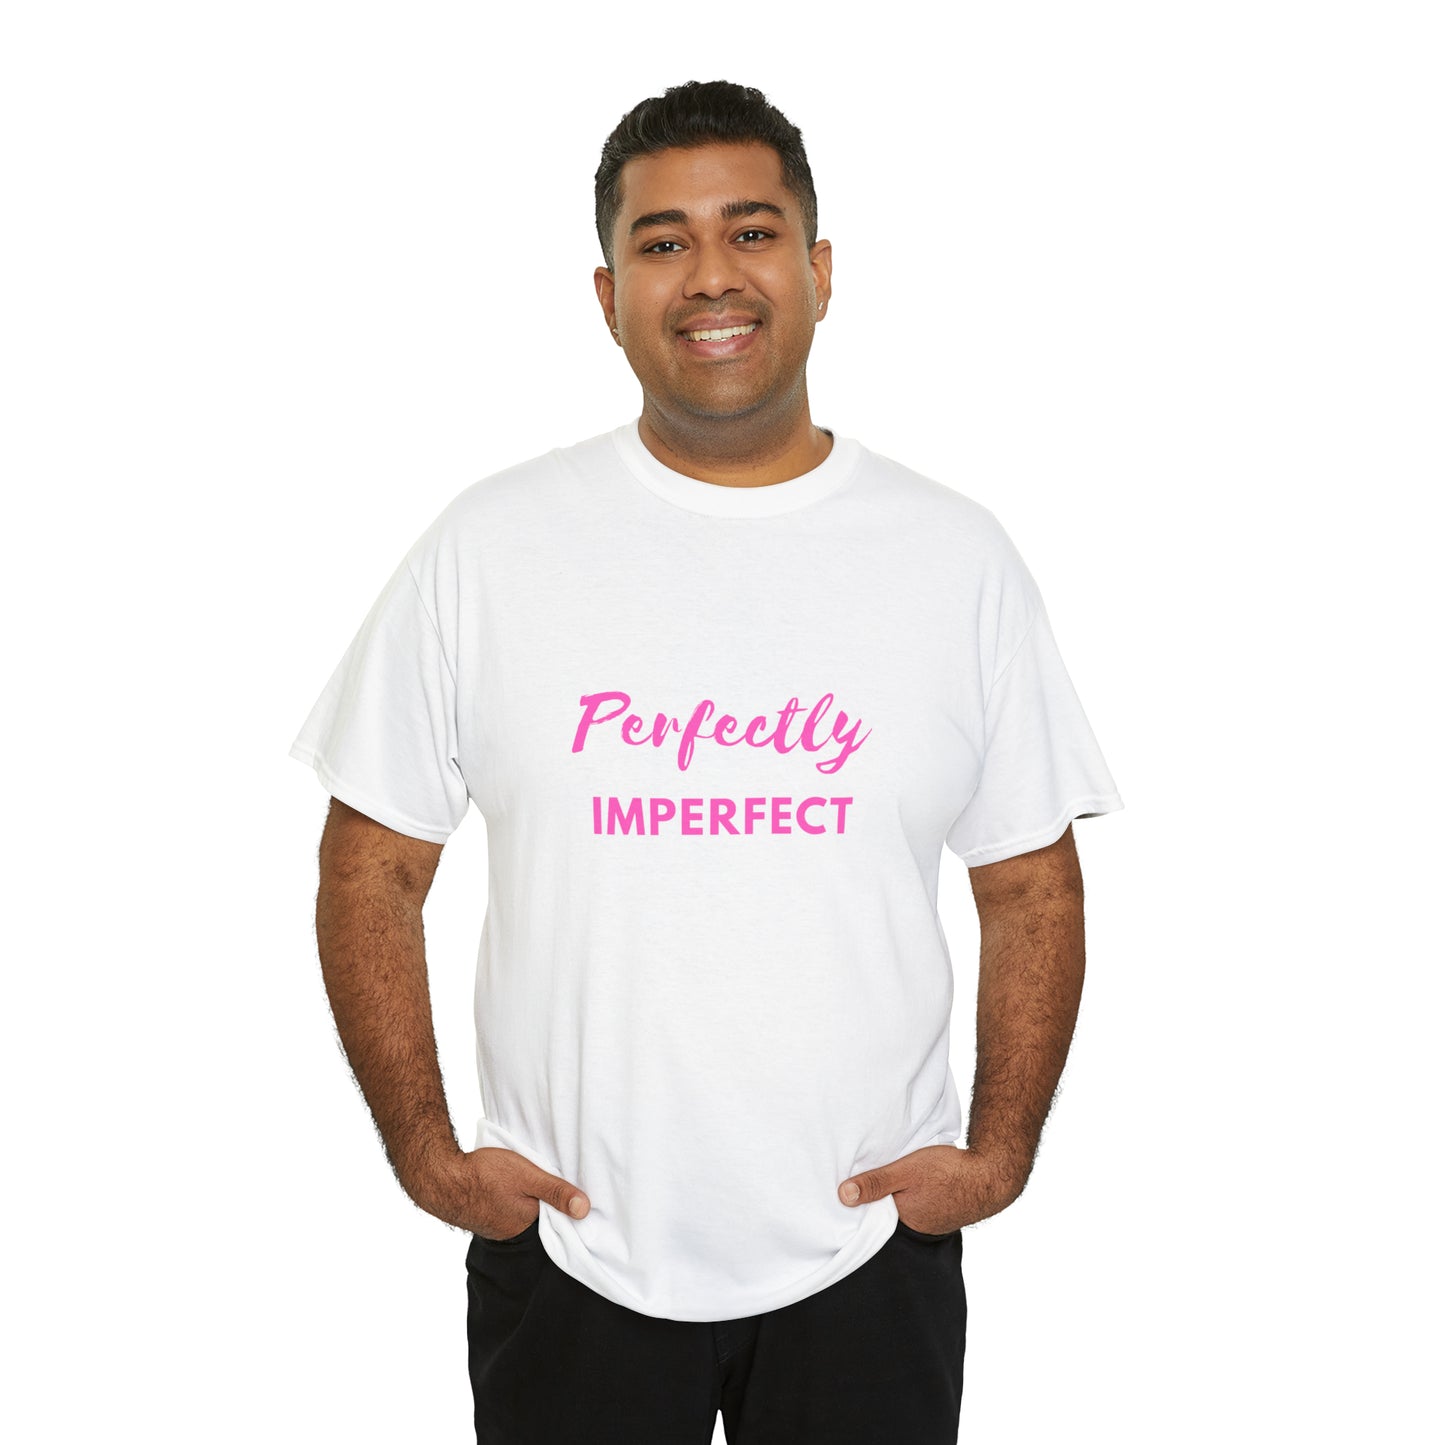 "Perfectly Imperfect" T-shirt